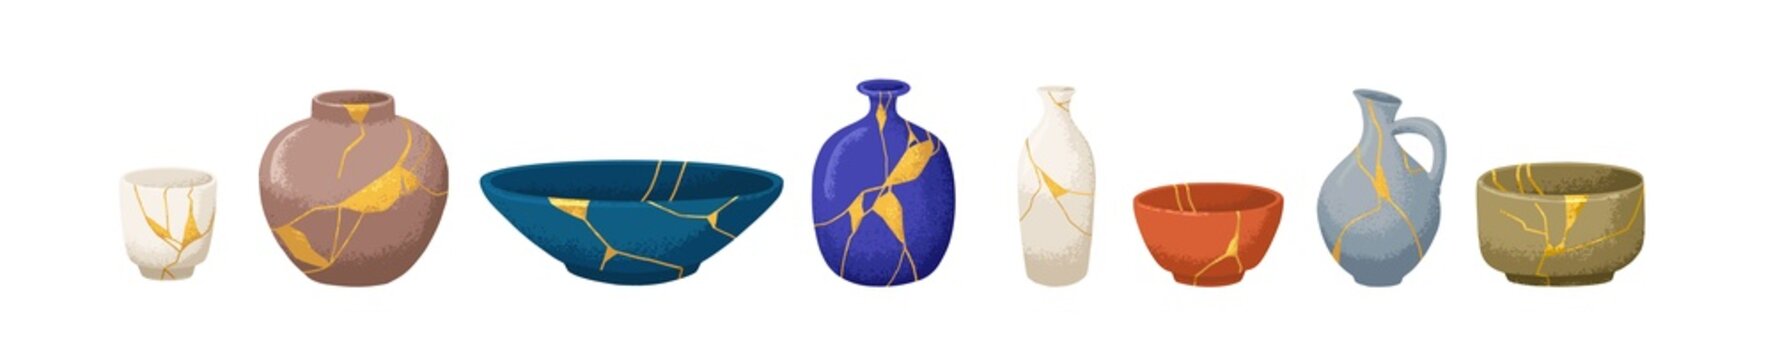 Kintsugi ceramics. Reborn pottery from broken tableware, repaired with gold line patterns. Vintage Japanese vases, bowls set. Colored flat graphic vector illustrations isolated on white background